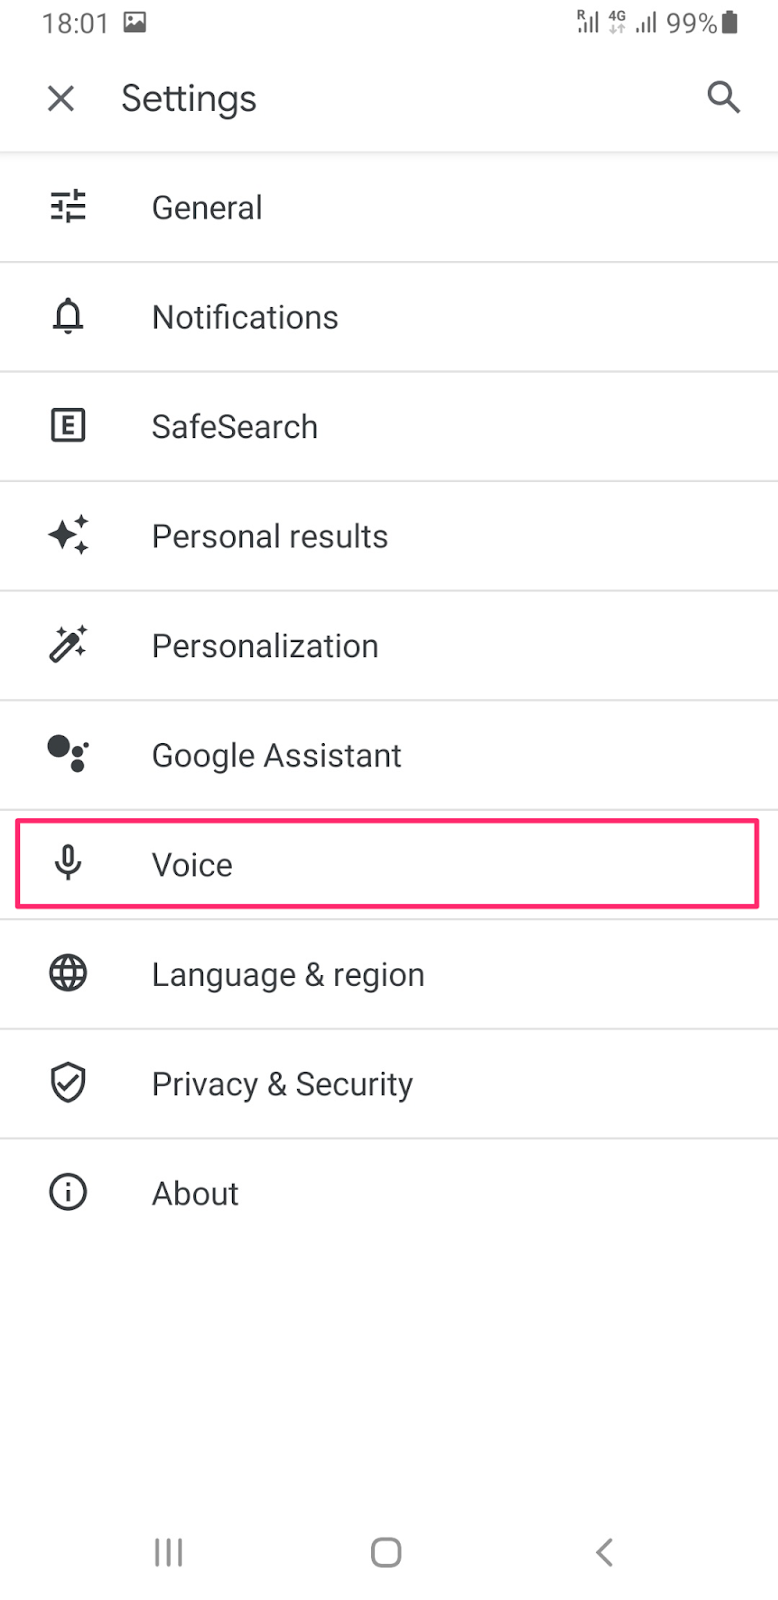 Select "Voice"